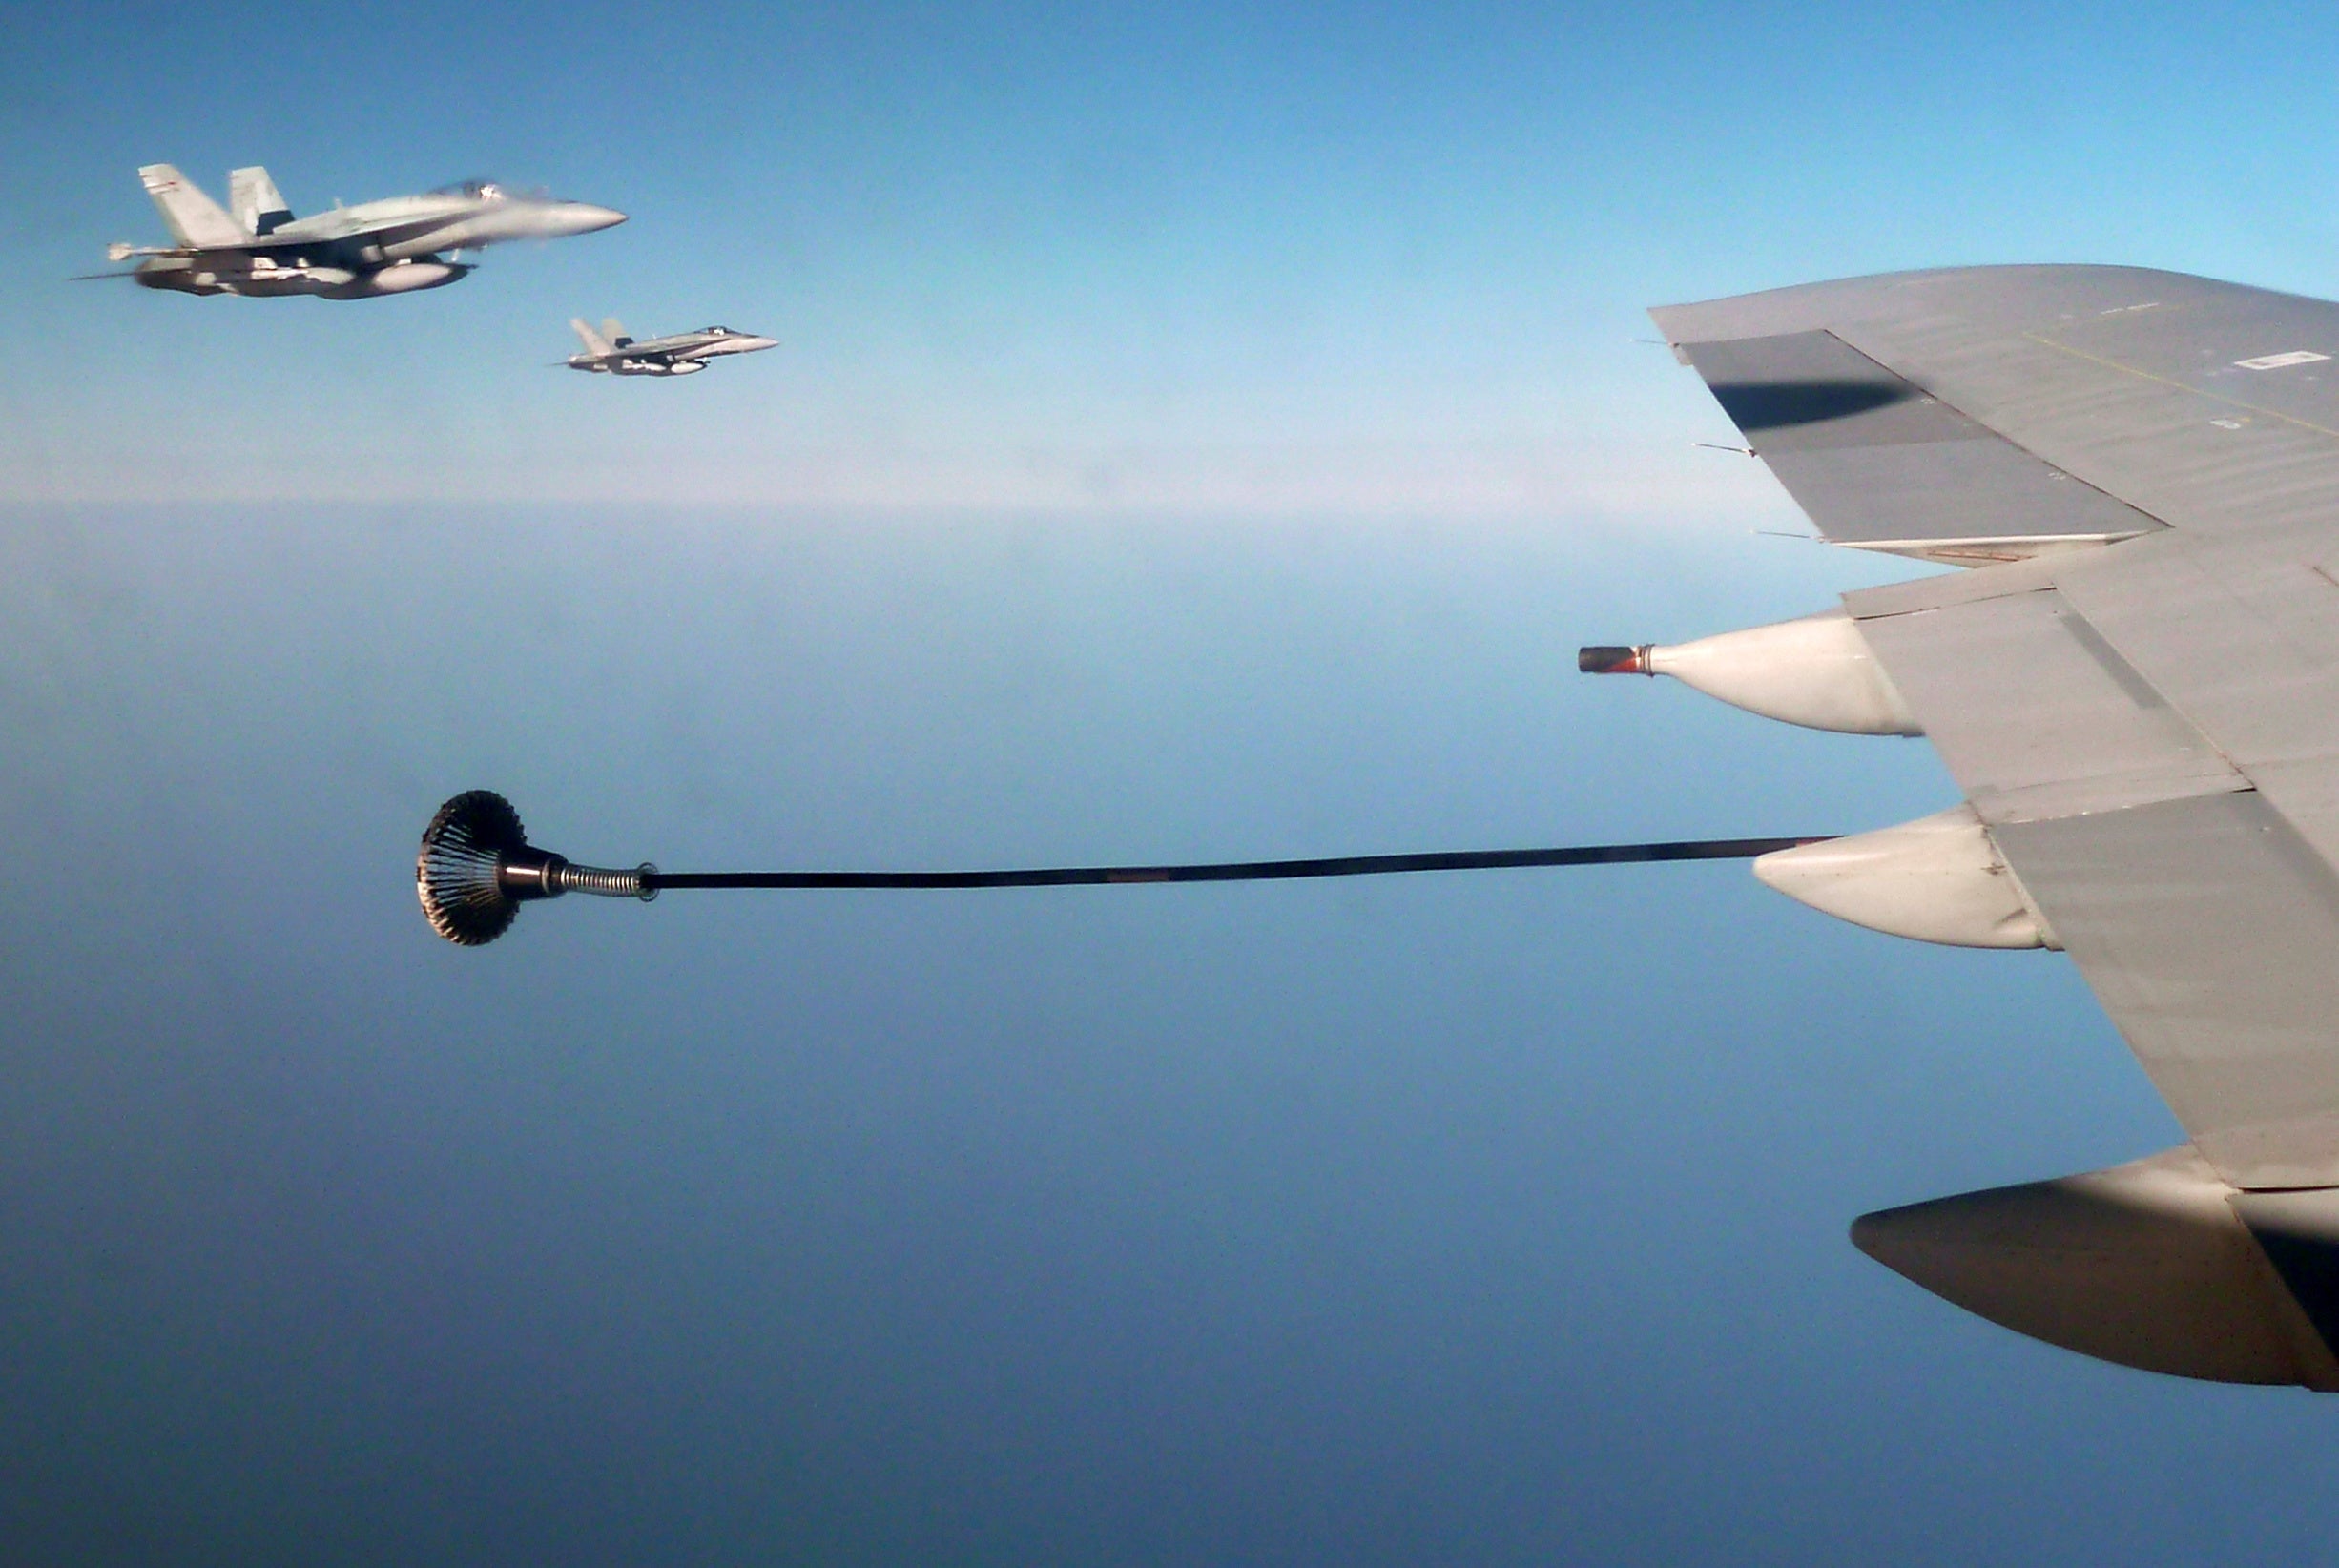 Cobham has pioneered air to air refuelling